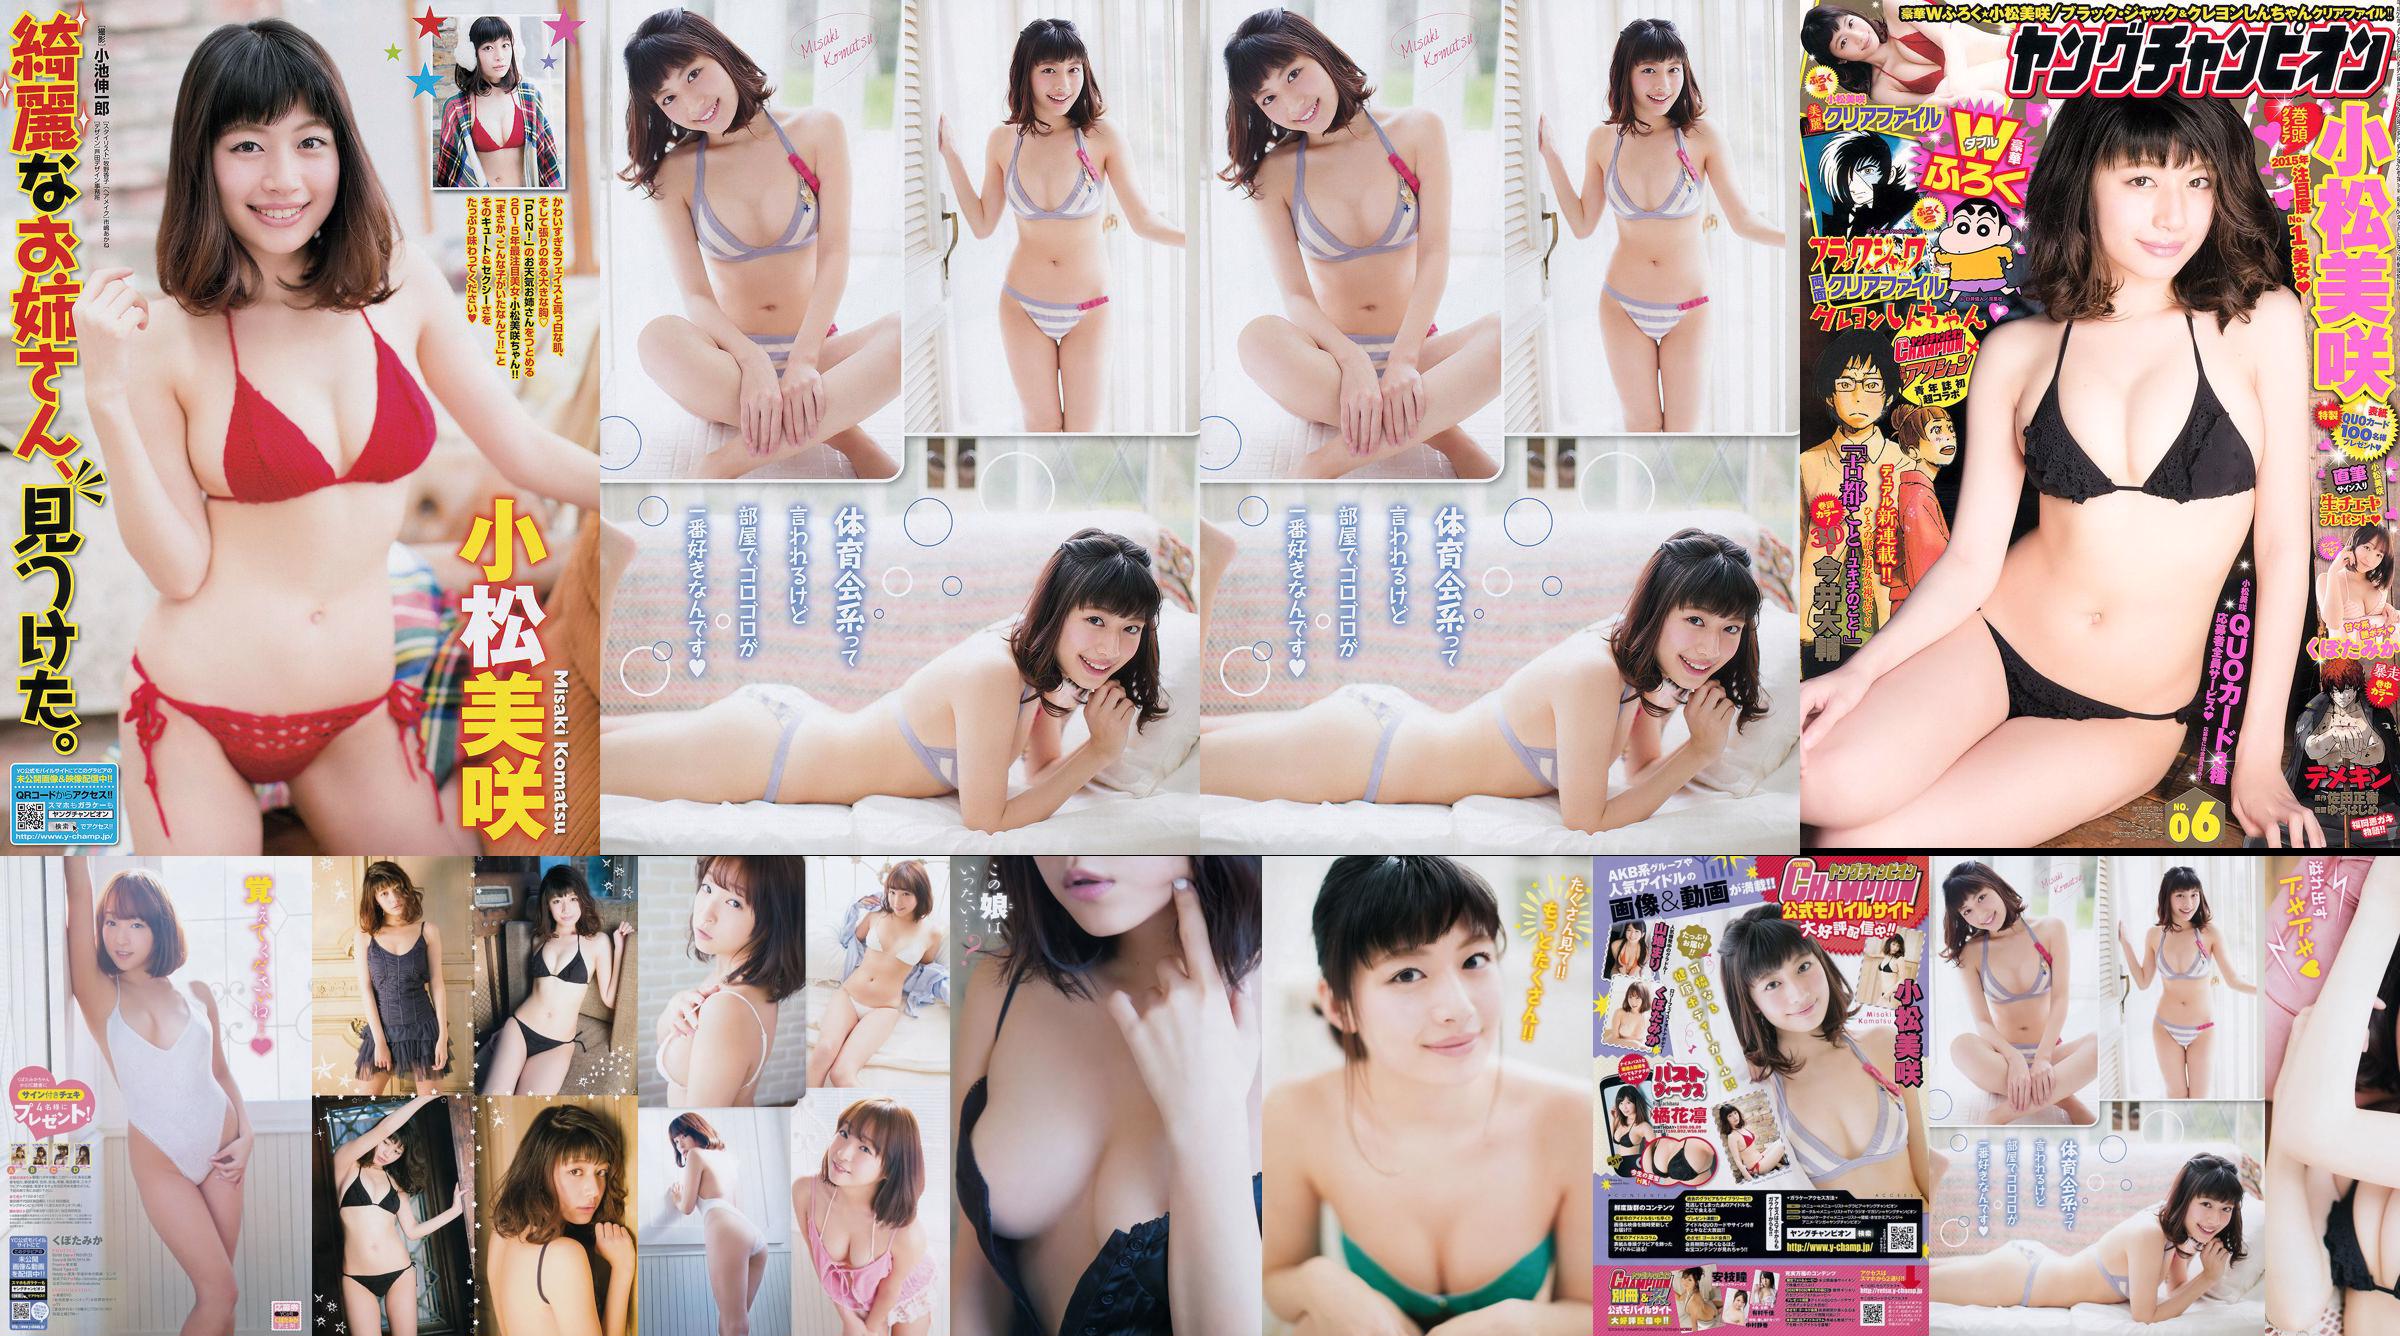 Hina Aizuki "Chaque! Belle! Fille !!" [Sabra.net] Strictly Girl No.be40a1 Page 2